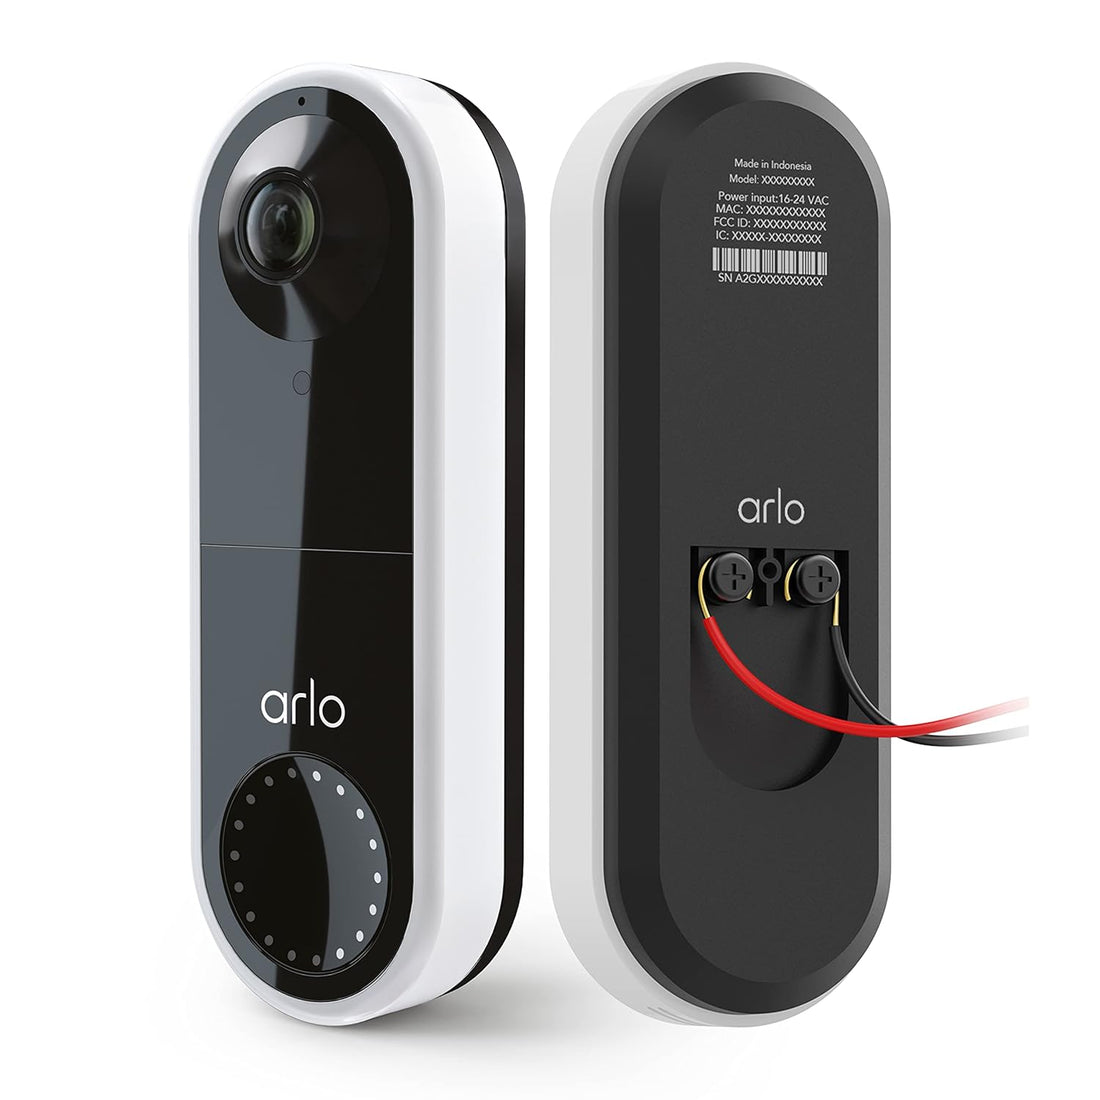 Arlo Video Doorbell | HD Video Quality, 2-Way Audio, Package Detection | Motion Detection and Alerts | Built-in Siren | Night Vision | Easy Installation (Existing Doorbell Wiring Required) | (AVD1001)